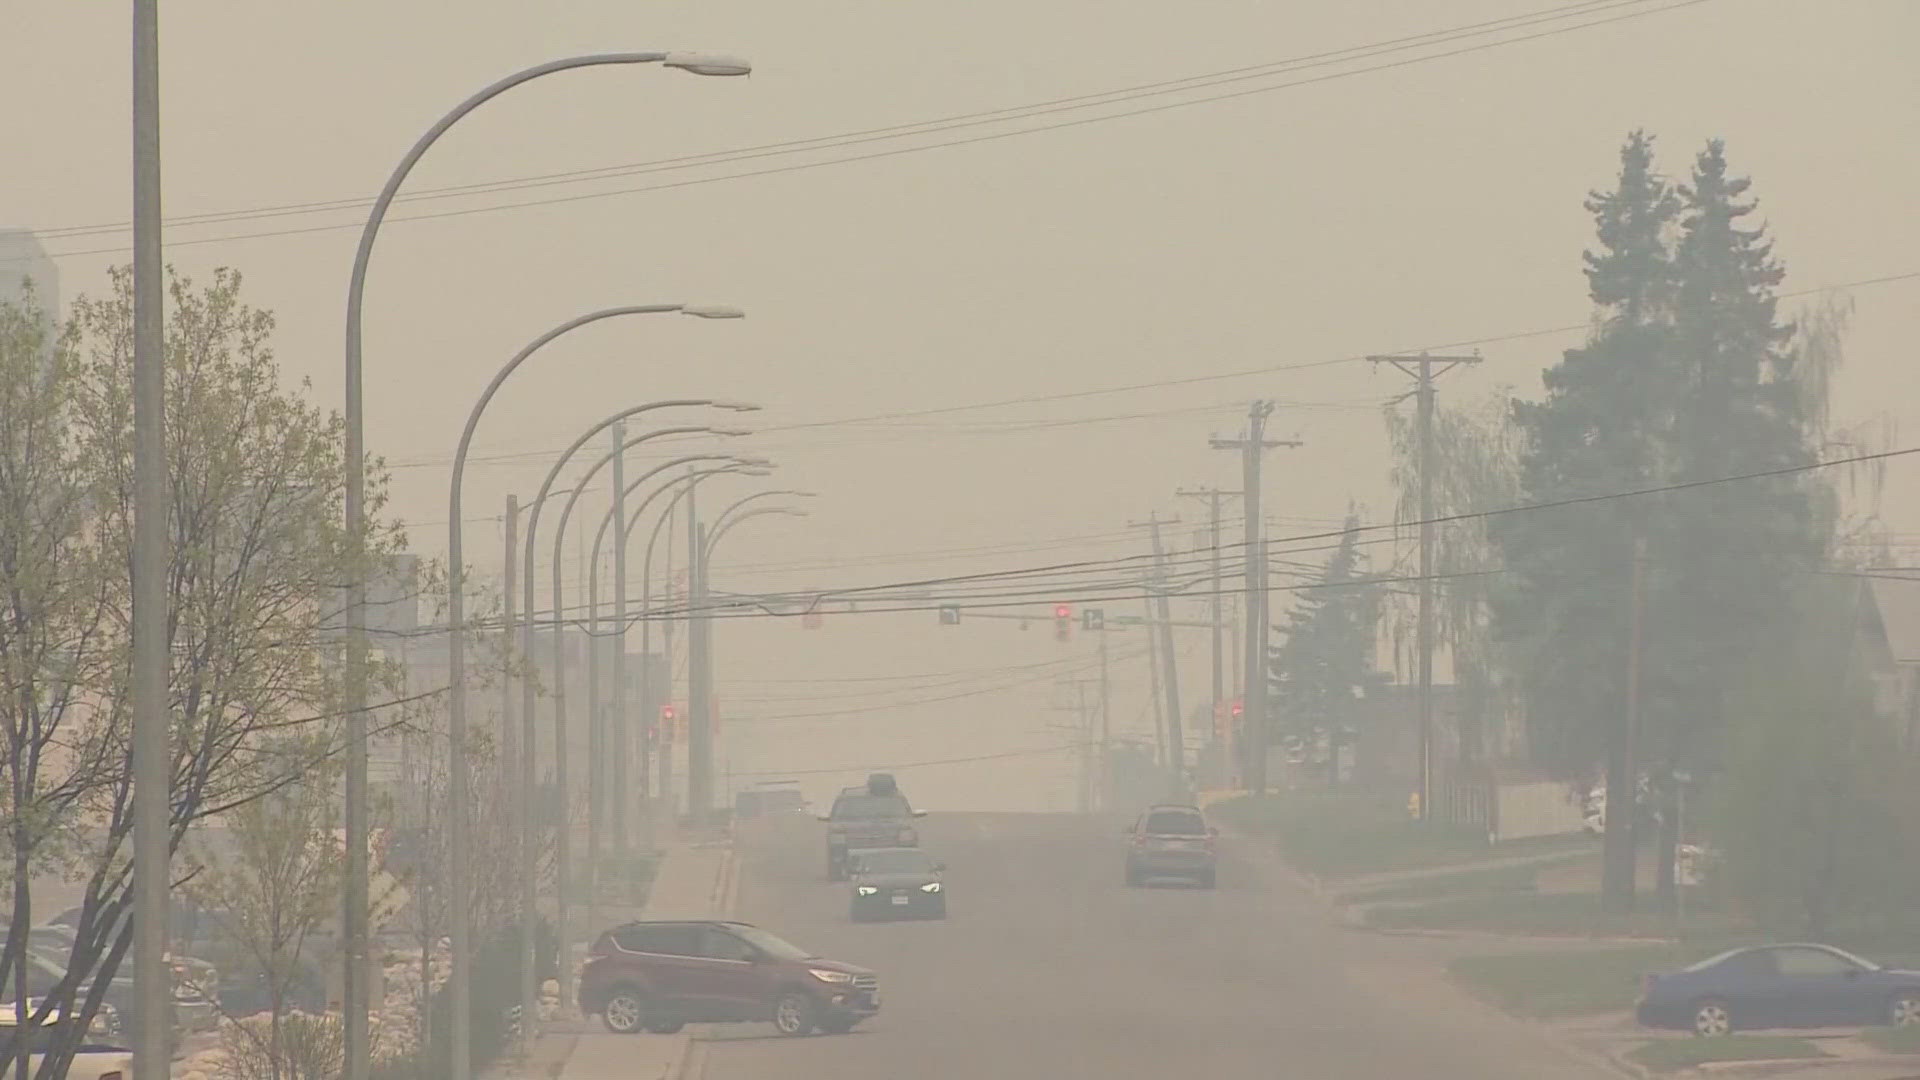 Wildfires are forcing thousands of people to evacuate parts of Canada.